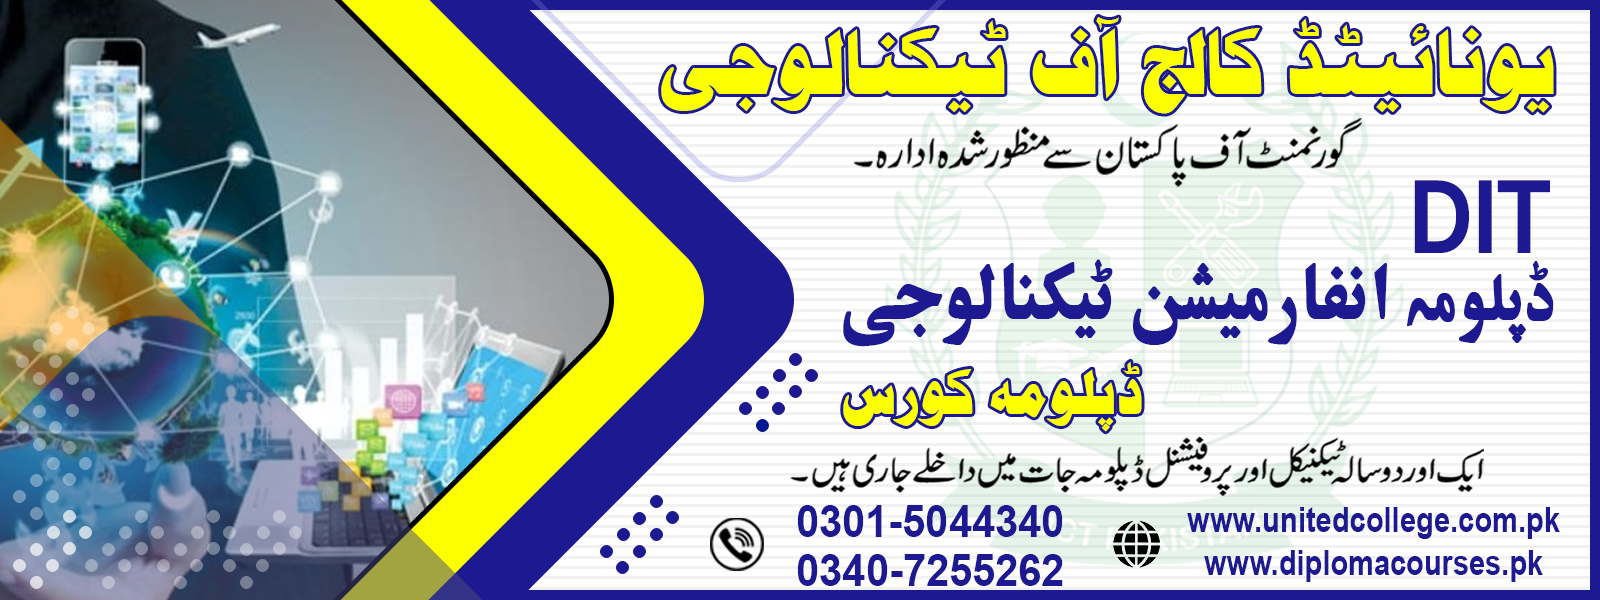 DIT (DIPLOMA IN INFORMATION TECHNOLOGY) COURSE IN PAKISTAN